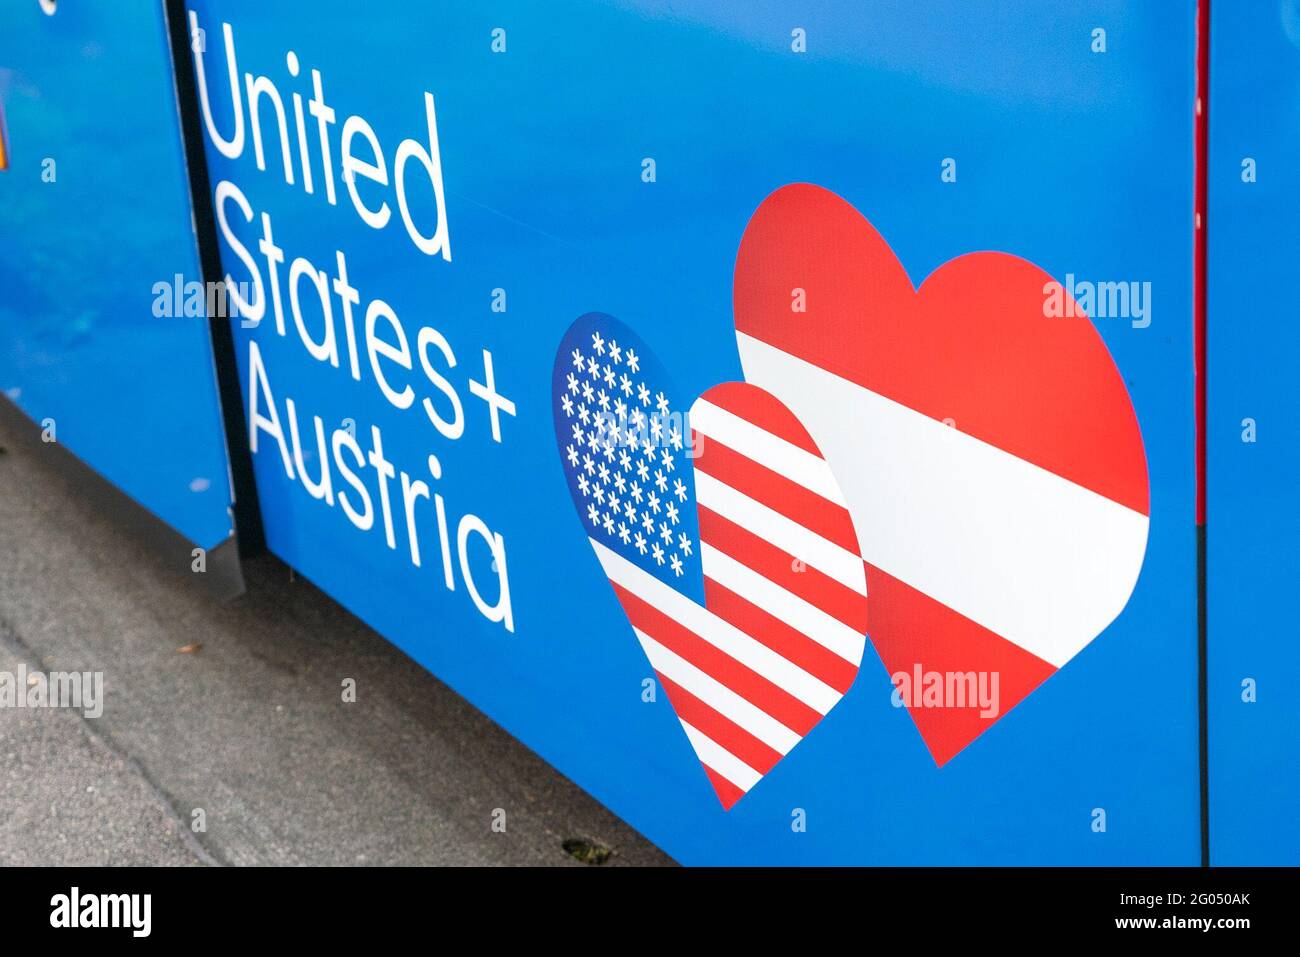 Secretary of State Michael R. Pompeo participates in the launch of the U.S.-Austria Friendship Tram with Vienna Mayor Michael Ludwig and United States Ambassador to the Republic of Austria Trevor D. Traina, in Vienna, Austria, on August 14, 2020 Stock Photo